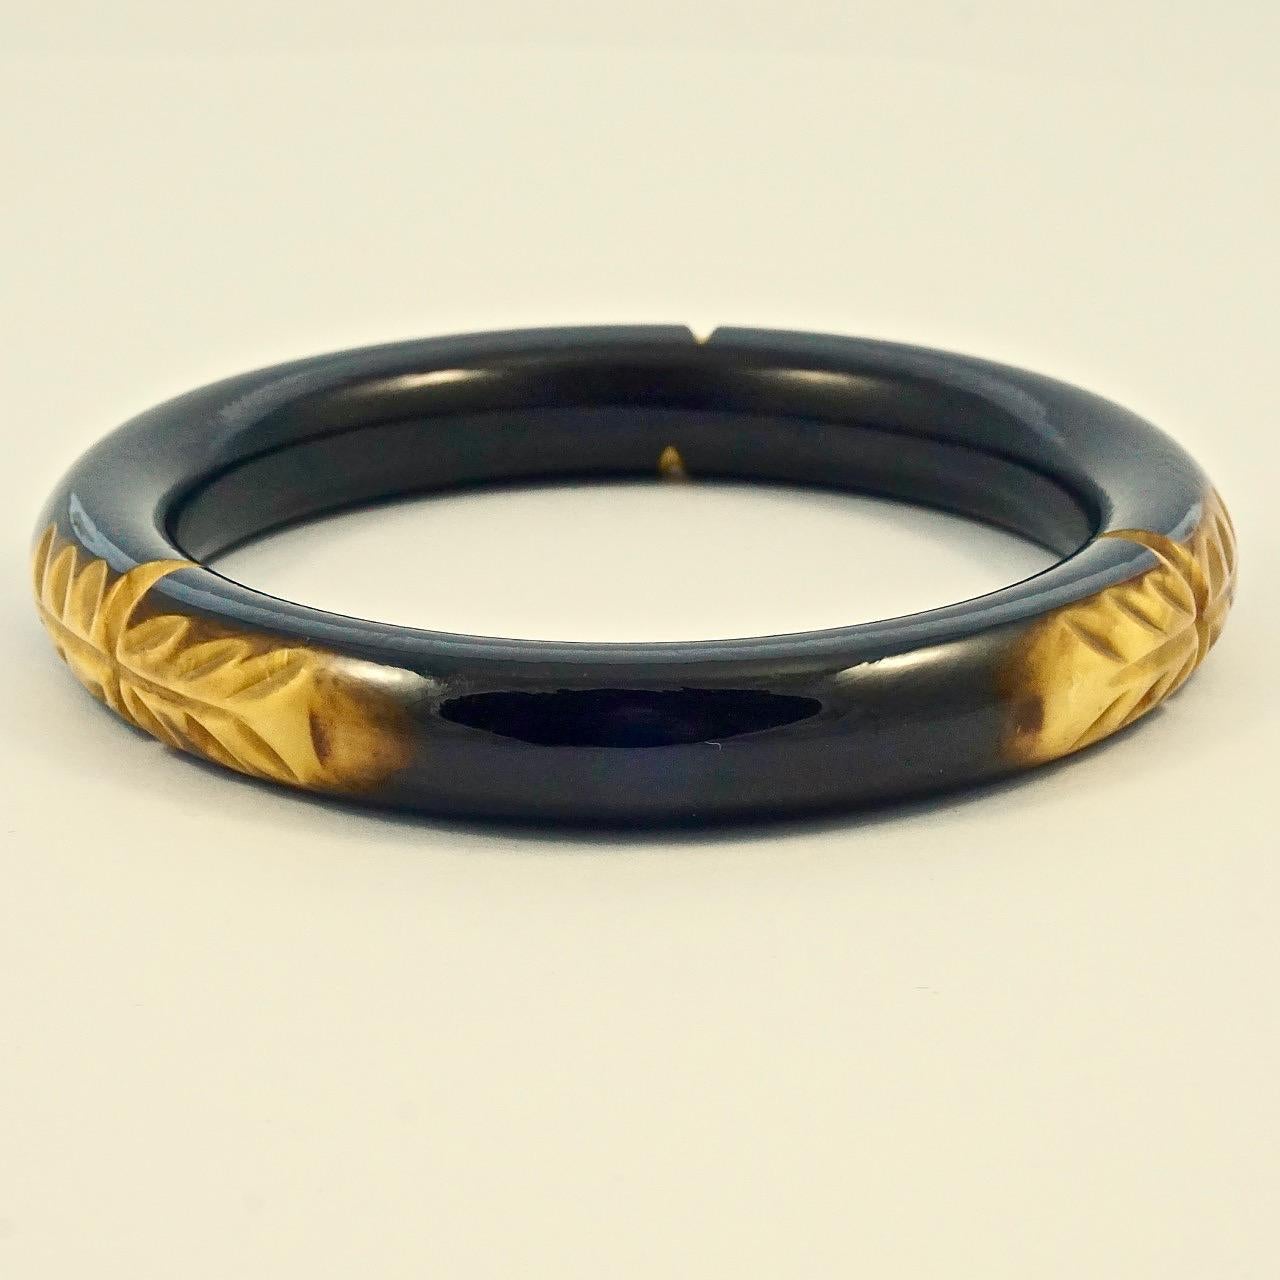 Wonderful Art Deco black Bakelite bangle with marbled yellow leaves carving. Inside diameter 6.4cm / 2.5 inches by width 1.1cm / .4 inch. The bangle is in very good condition.

This is a beautiful vintage carved Bakelite bangle in a lovely